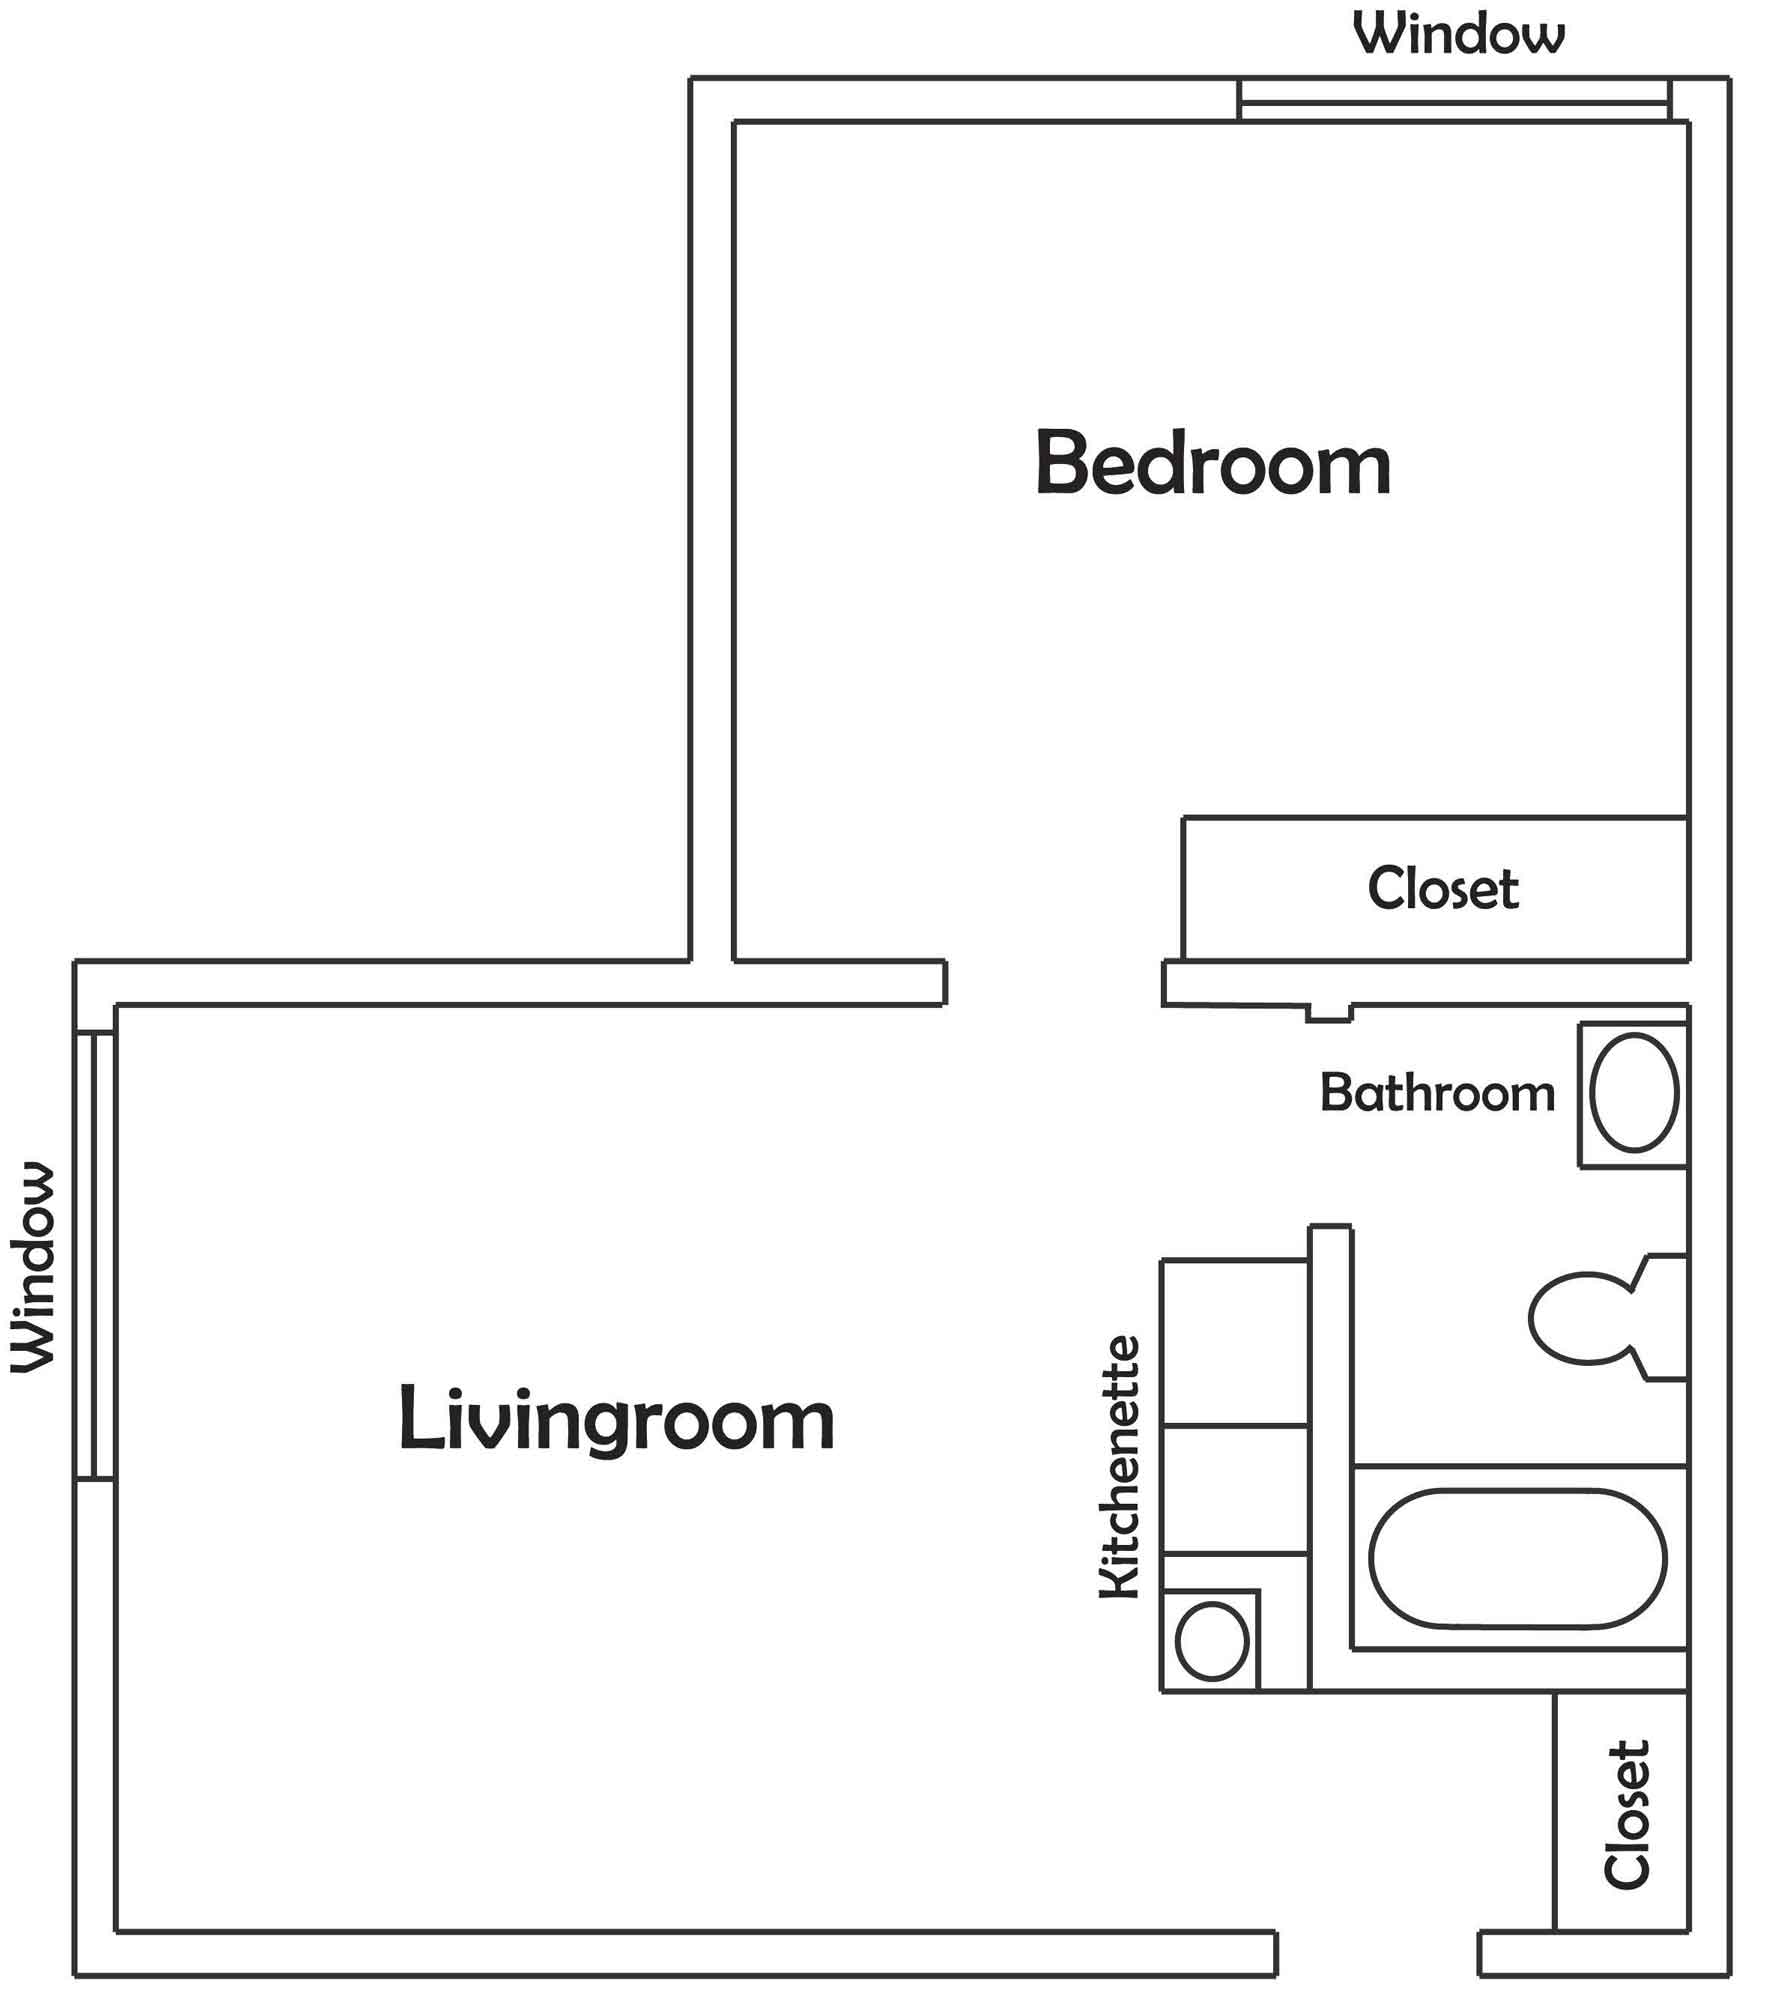 Floor plan for a one-bedroom apartment.